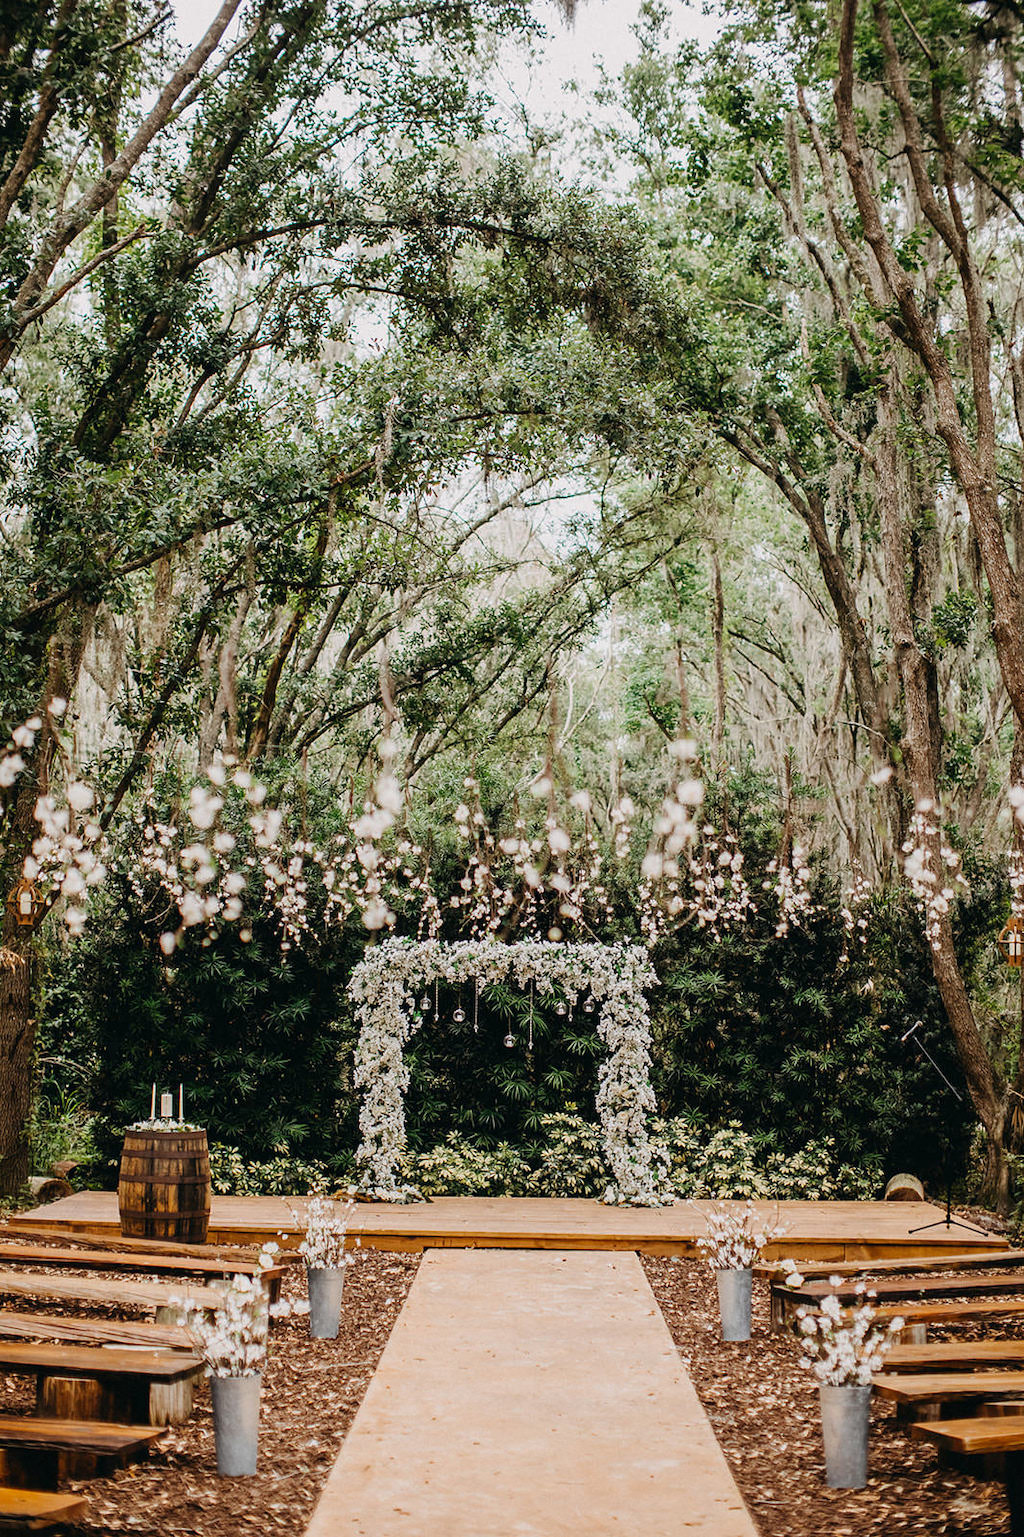 Elegant Outdoor Rustic Wedding Ceremony Decor, White and Greenery Floral Arch with Hanging Glass Bulbs | Lakeland Rustic Wedding Venue The Prairie Glenn Barn at Gable Oaks Ranch